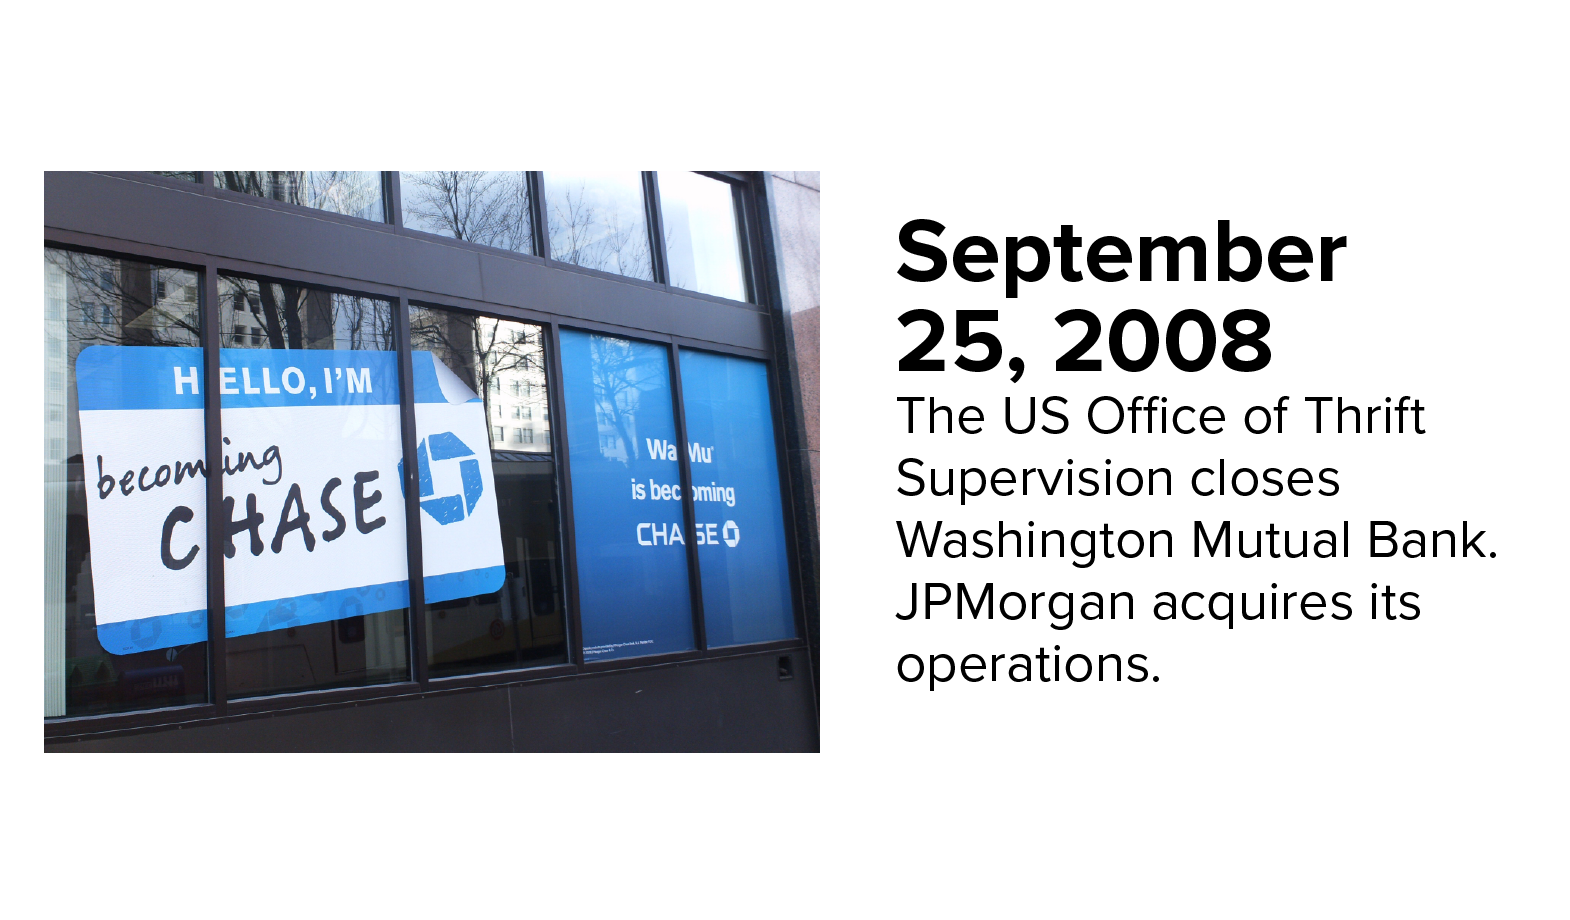 Sign in a Washington Mutual window states, “I'm becoming Chase.“ The US Office of Thrift Supervision closes Washington Mutual Bank in September of 2008. 